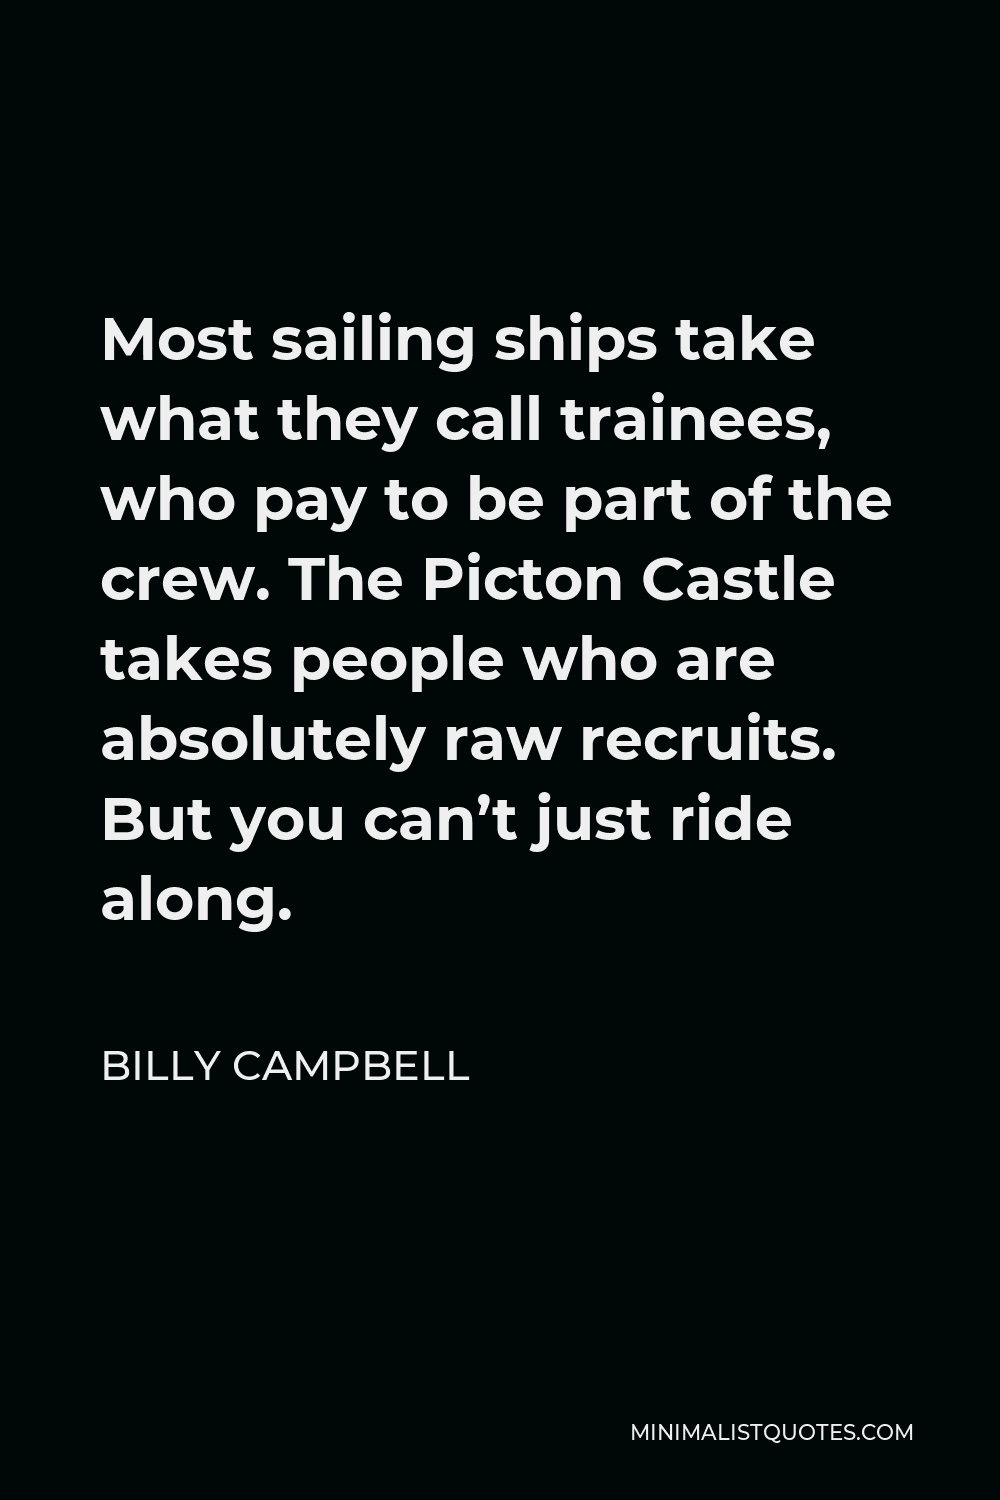 Billy Campbell Quote - Most sailing ships take what they call trainees, who pay to be part of the crew. The Picton Castle takes people who are absolutely raw recruits. But you can’t just ride along.